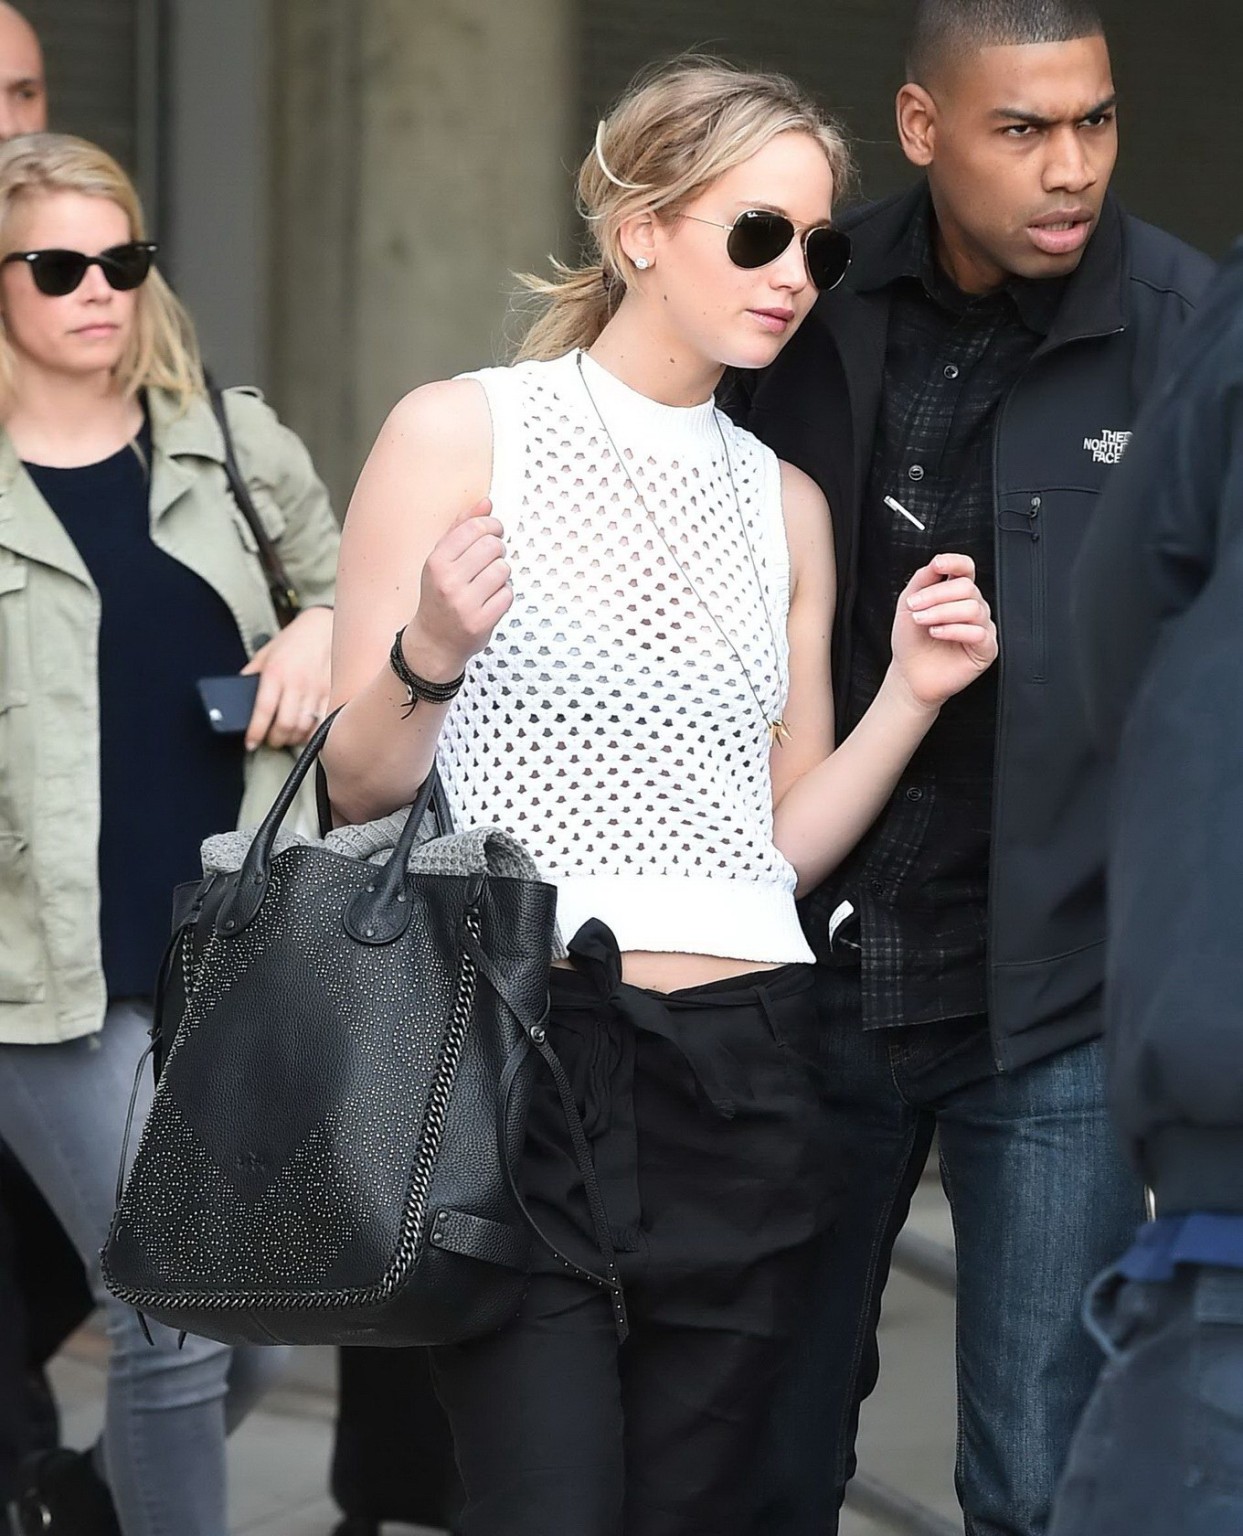 Vollbusig jennifer lawrence see through to bra out in nyc
 #75165255